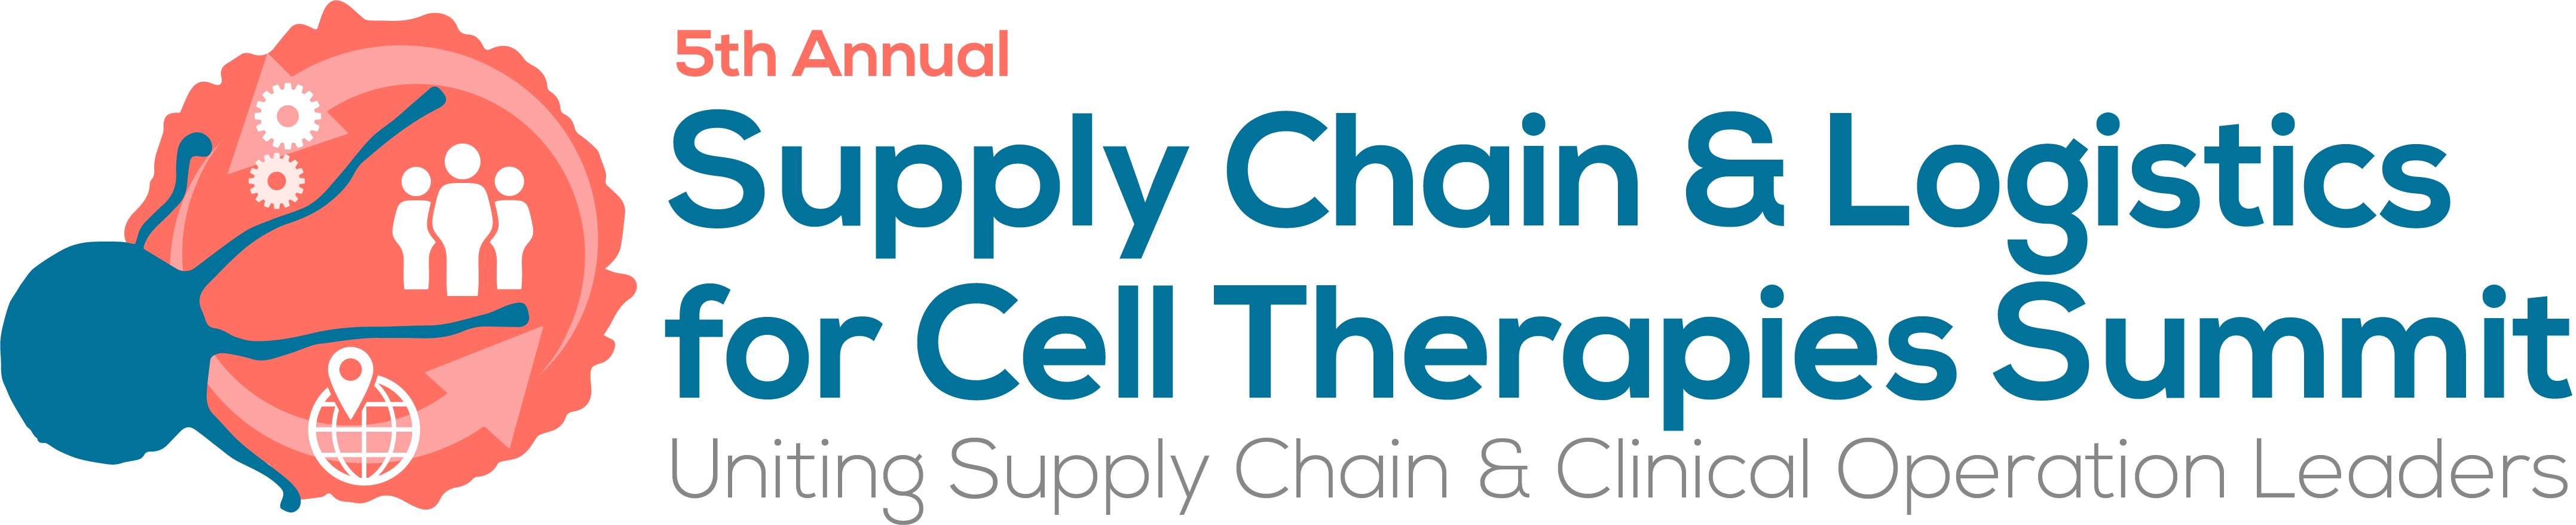 5th Annual Supply Chain & Logistics for Cell Therapies Summit